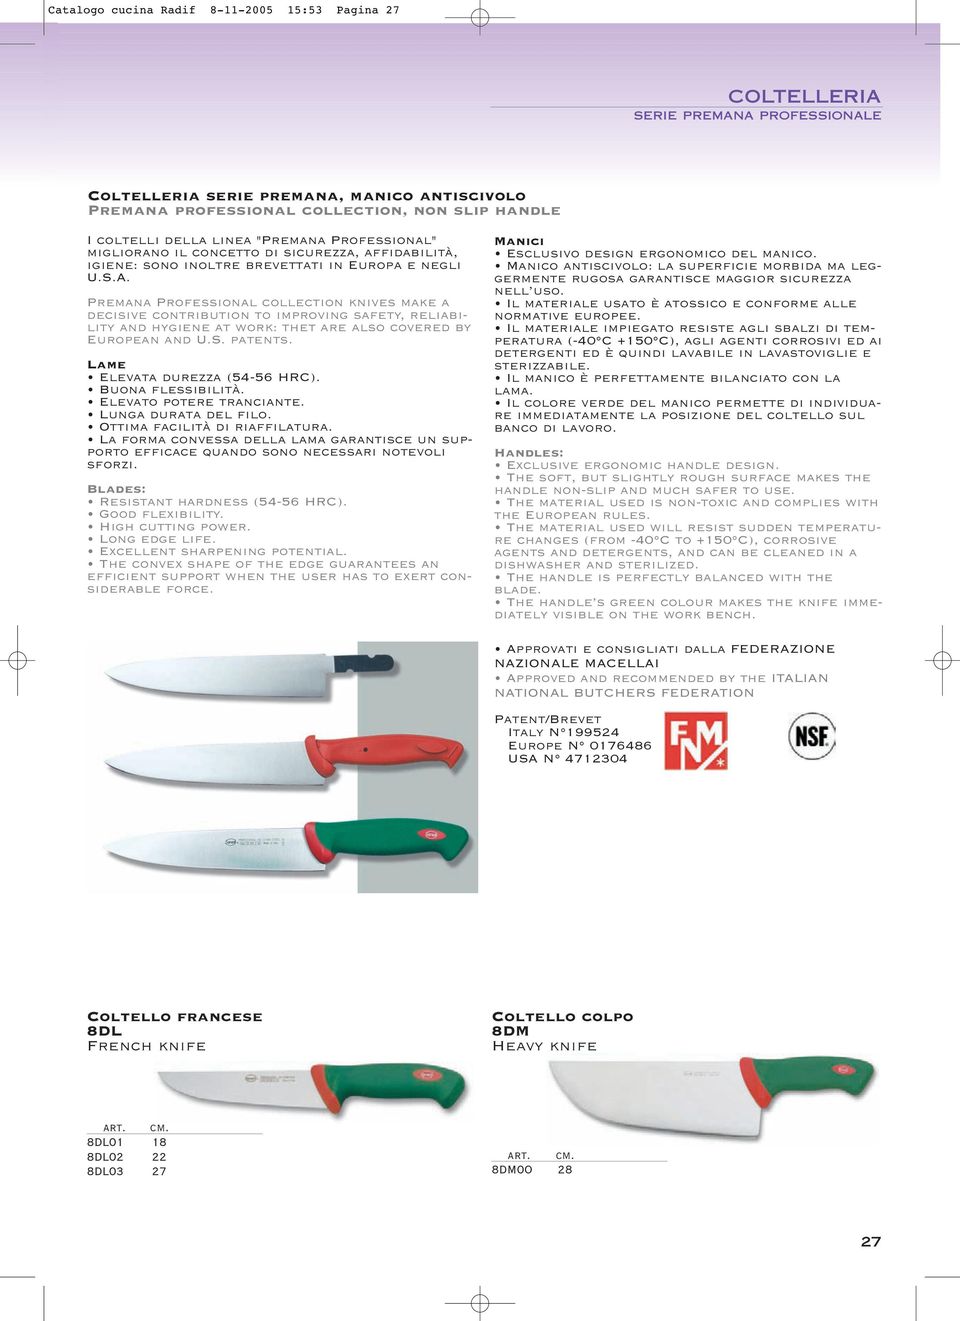 Premana Professional collection knives make a decisive contribution to improving safety, reliability and hygiene at work: thet are also covered by European and U.S. patents.